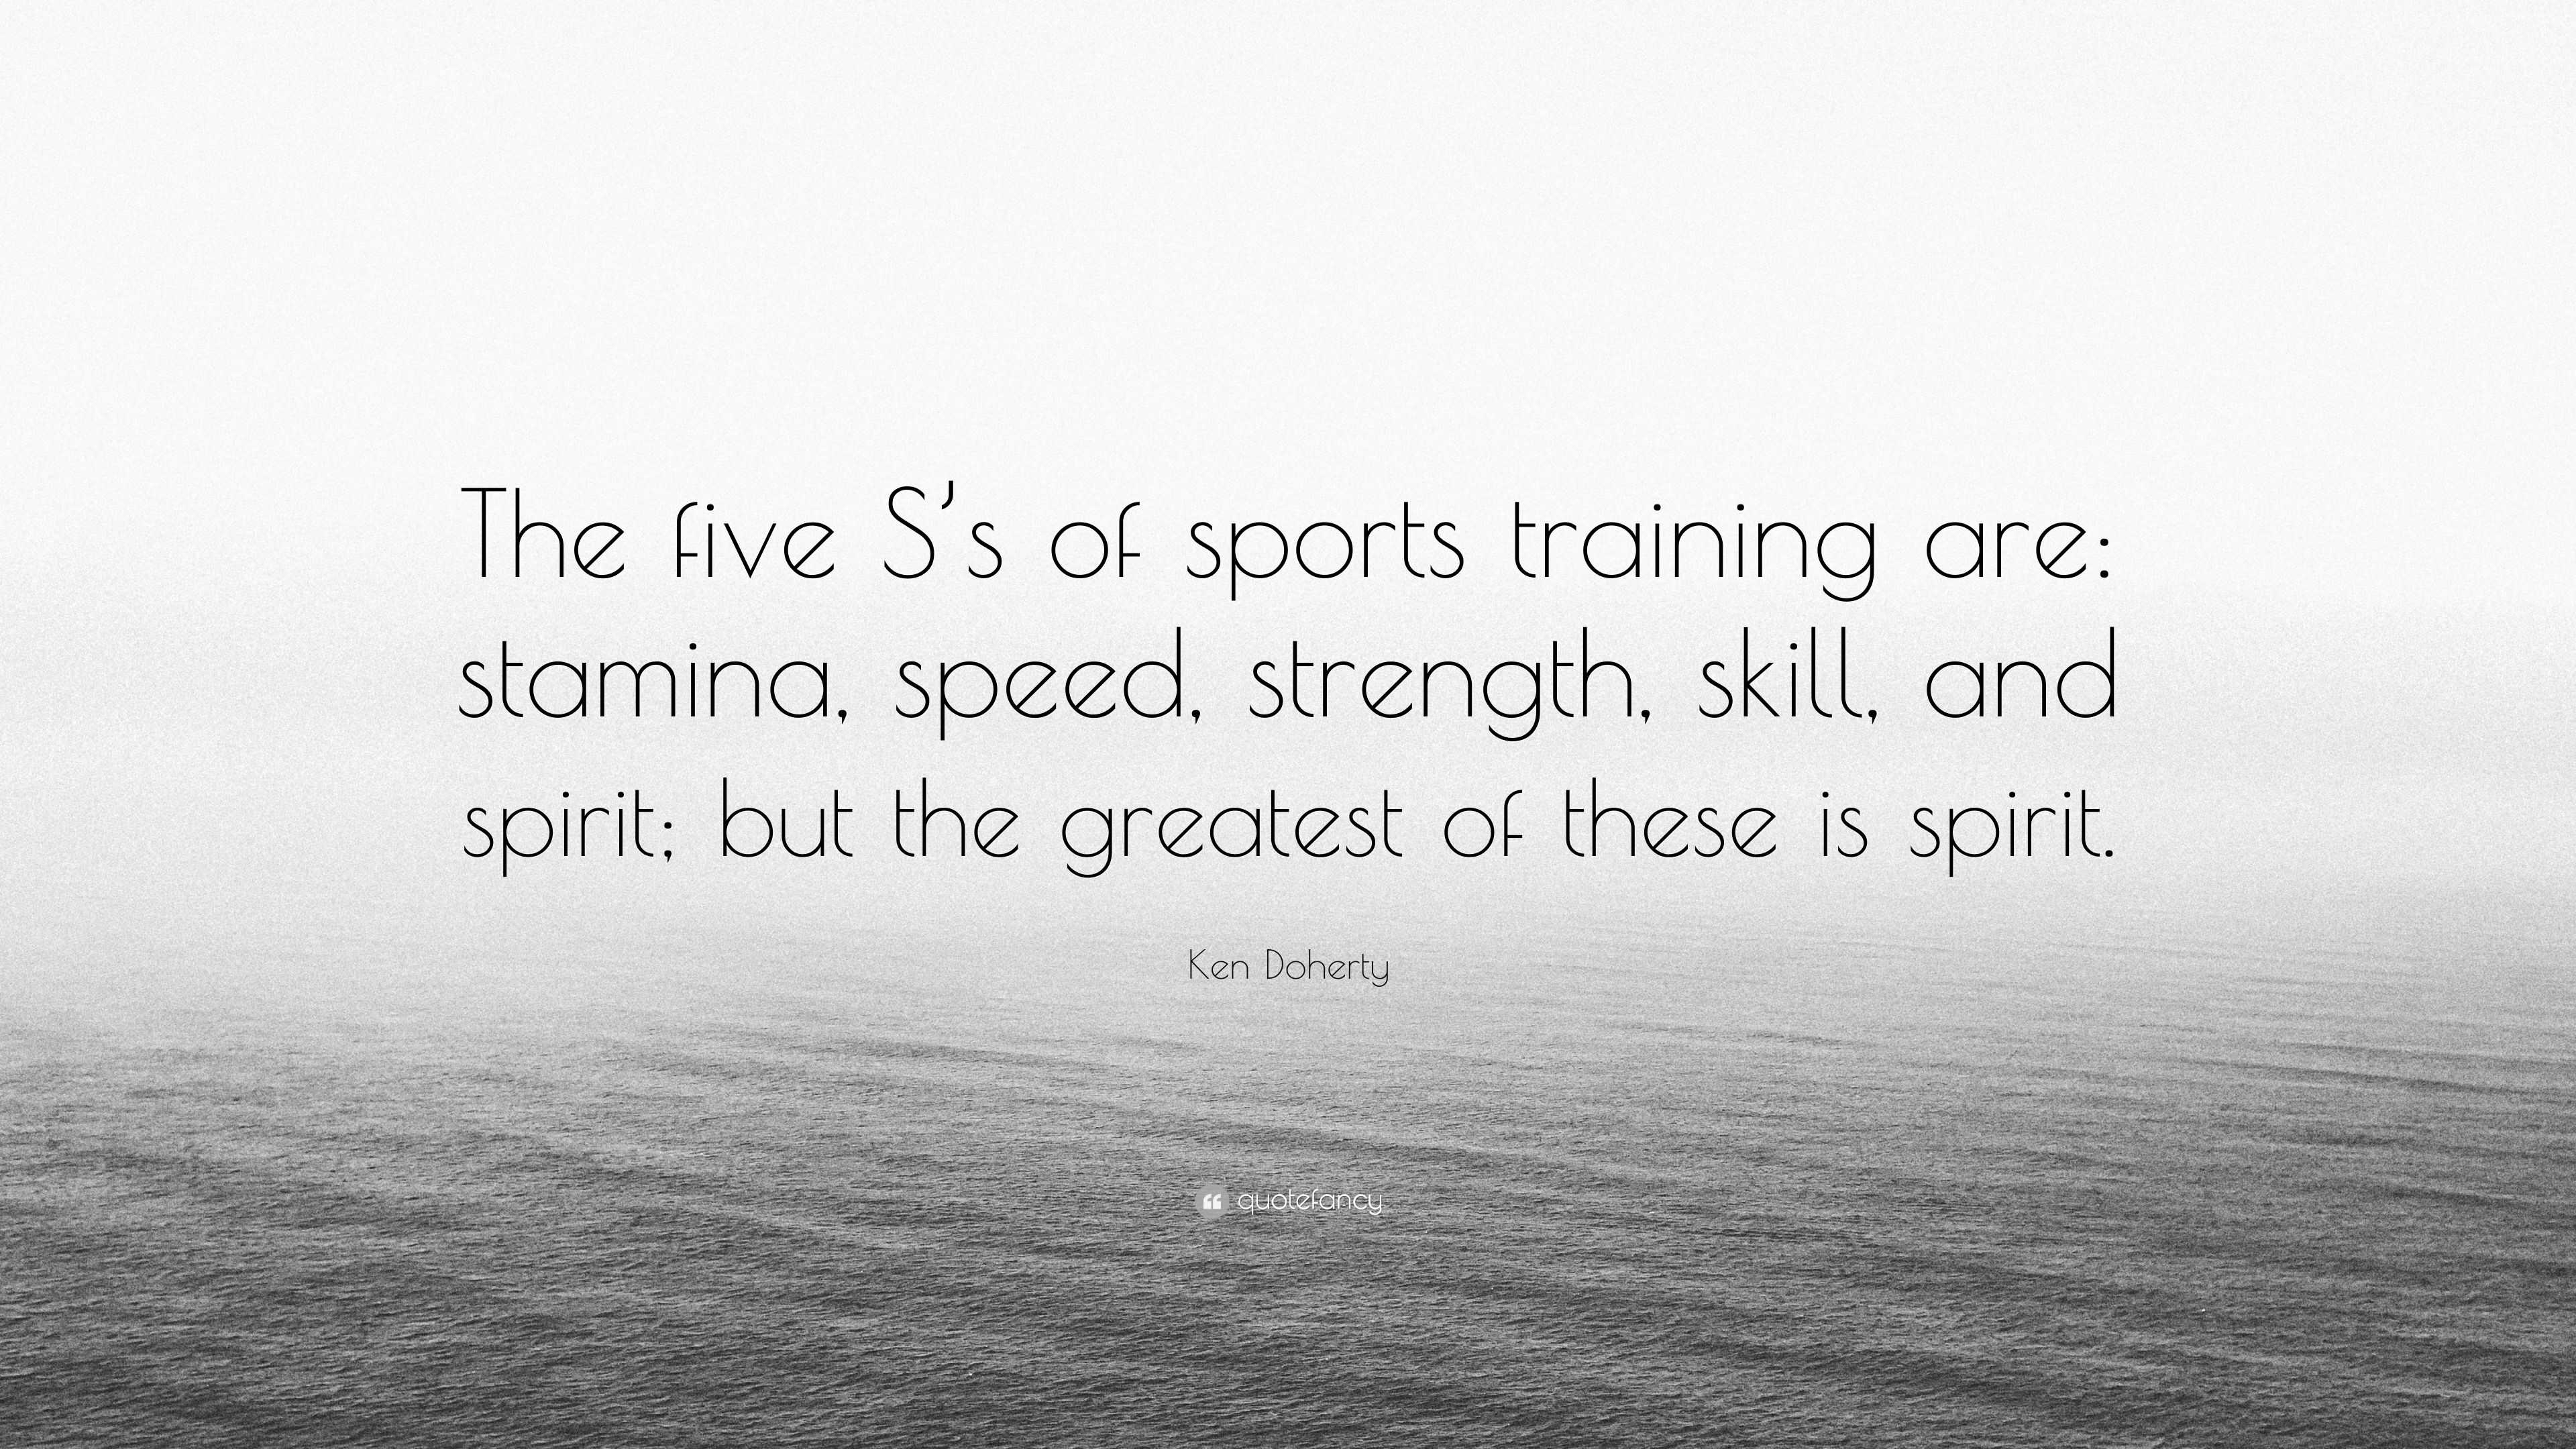 The five S's of sports training are: Stamina, Speed, Strength